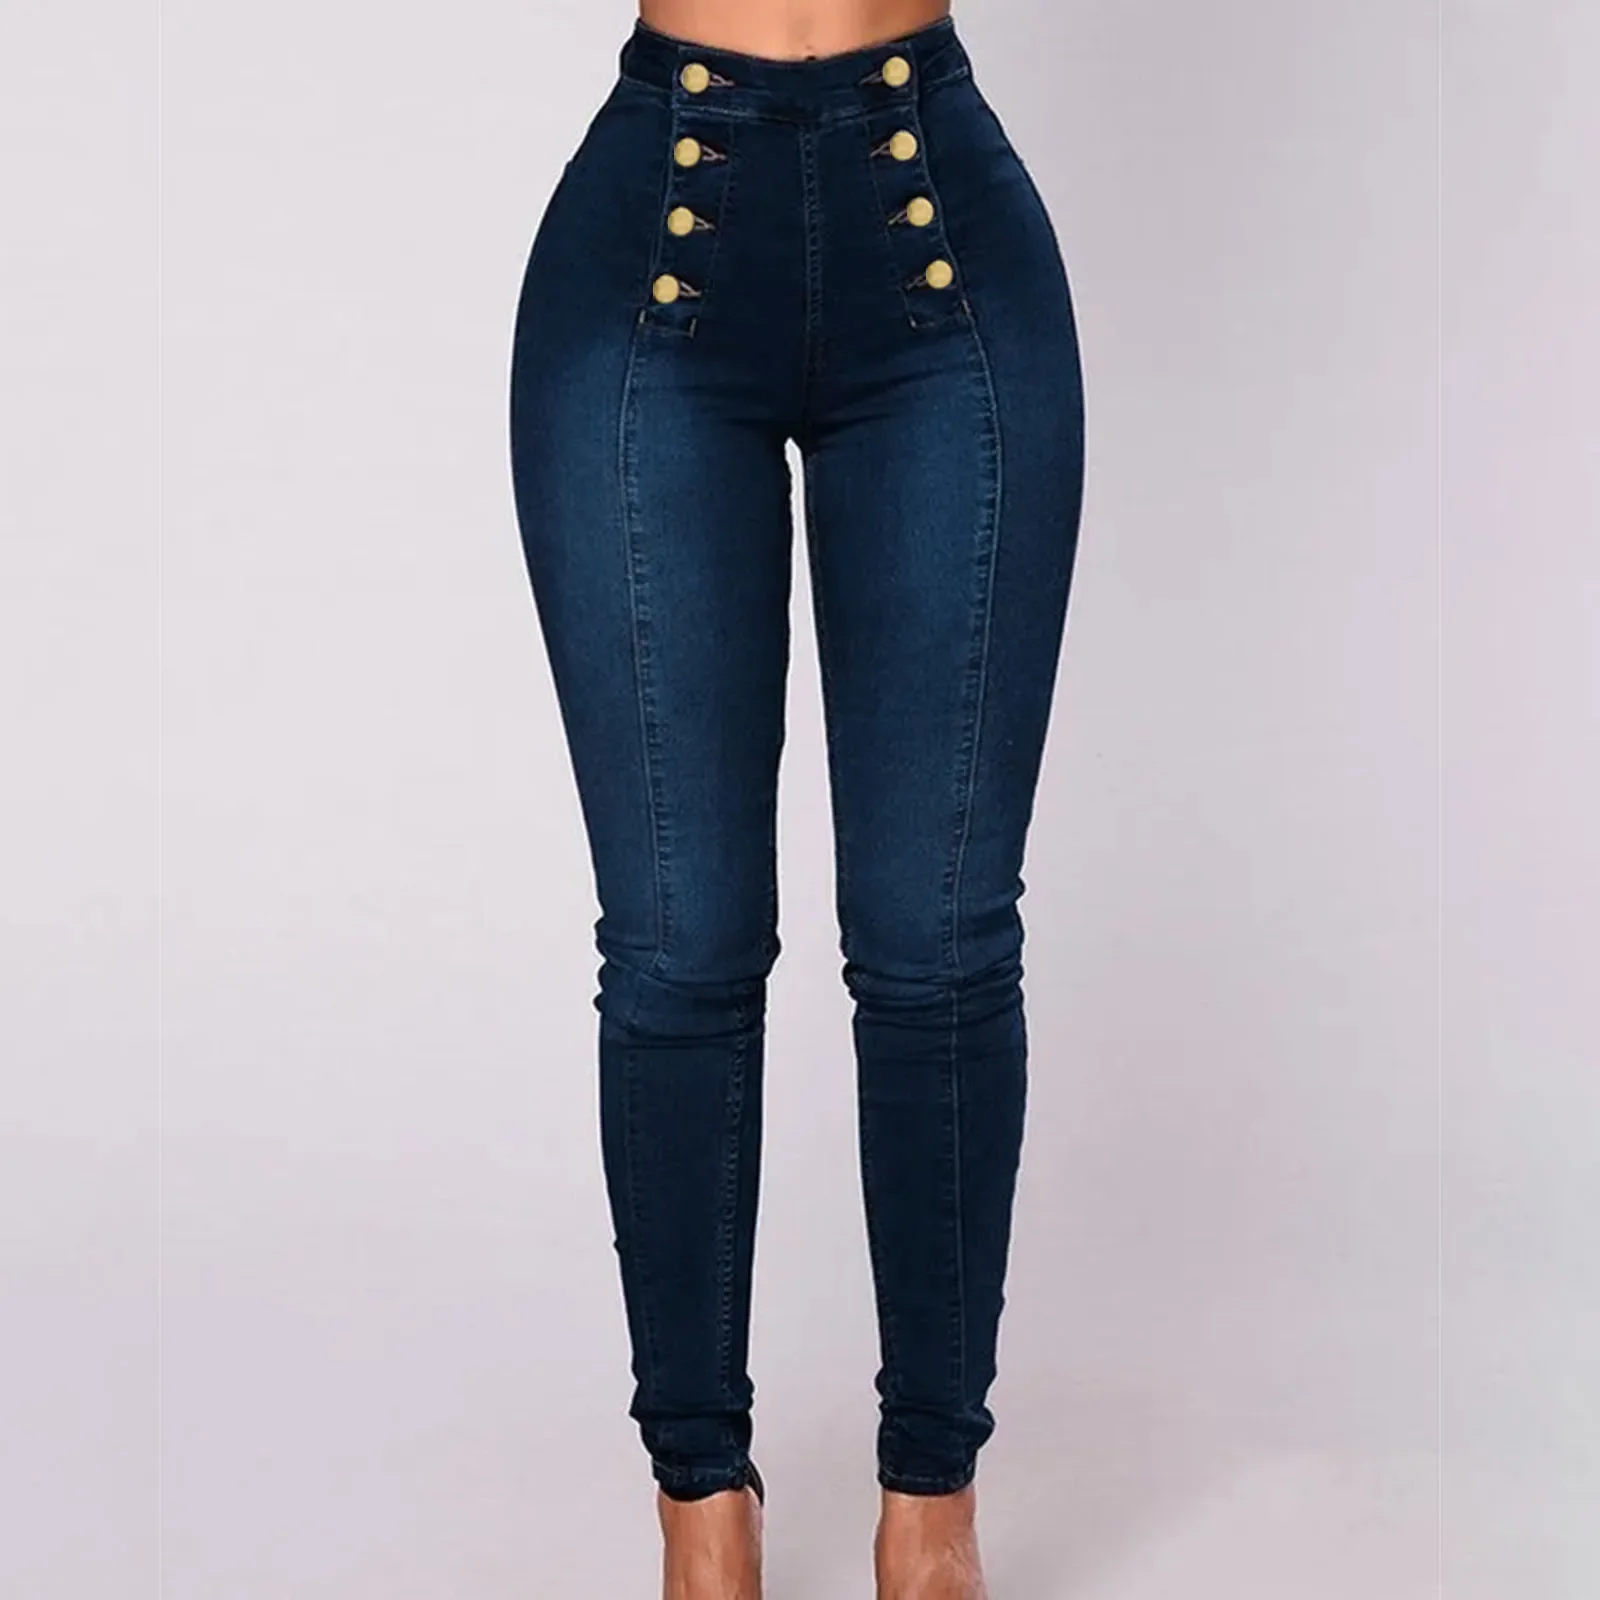 Denim Trousers Elastic High Waist Casual Jeans Trendy Double Breasted Multi Button Slim Skinny Jeans Ankle-Length Denim Pants